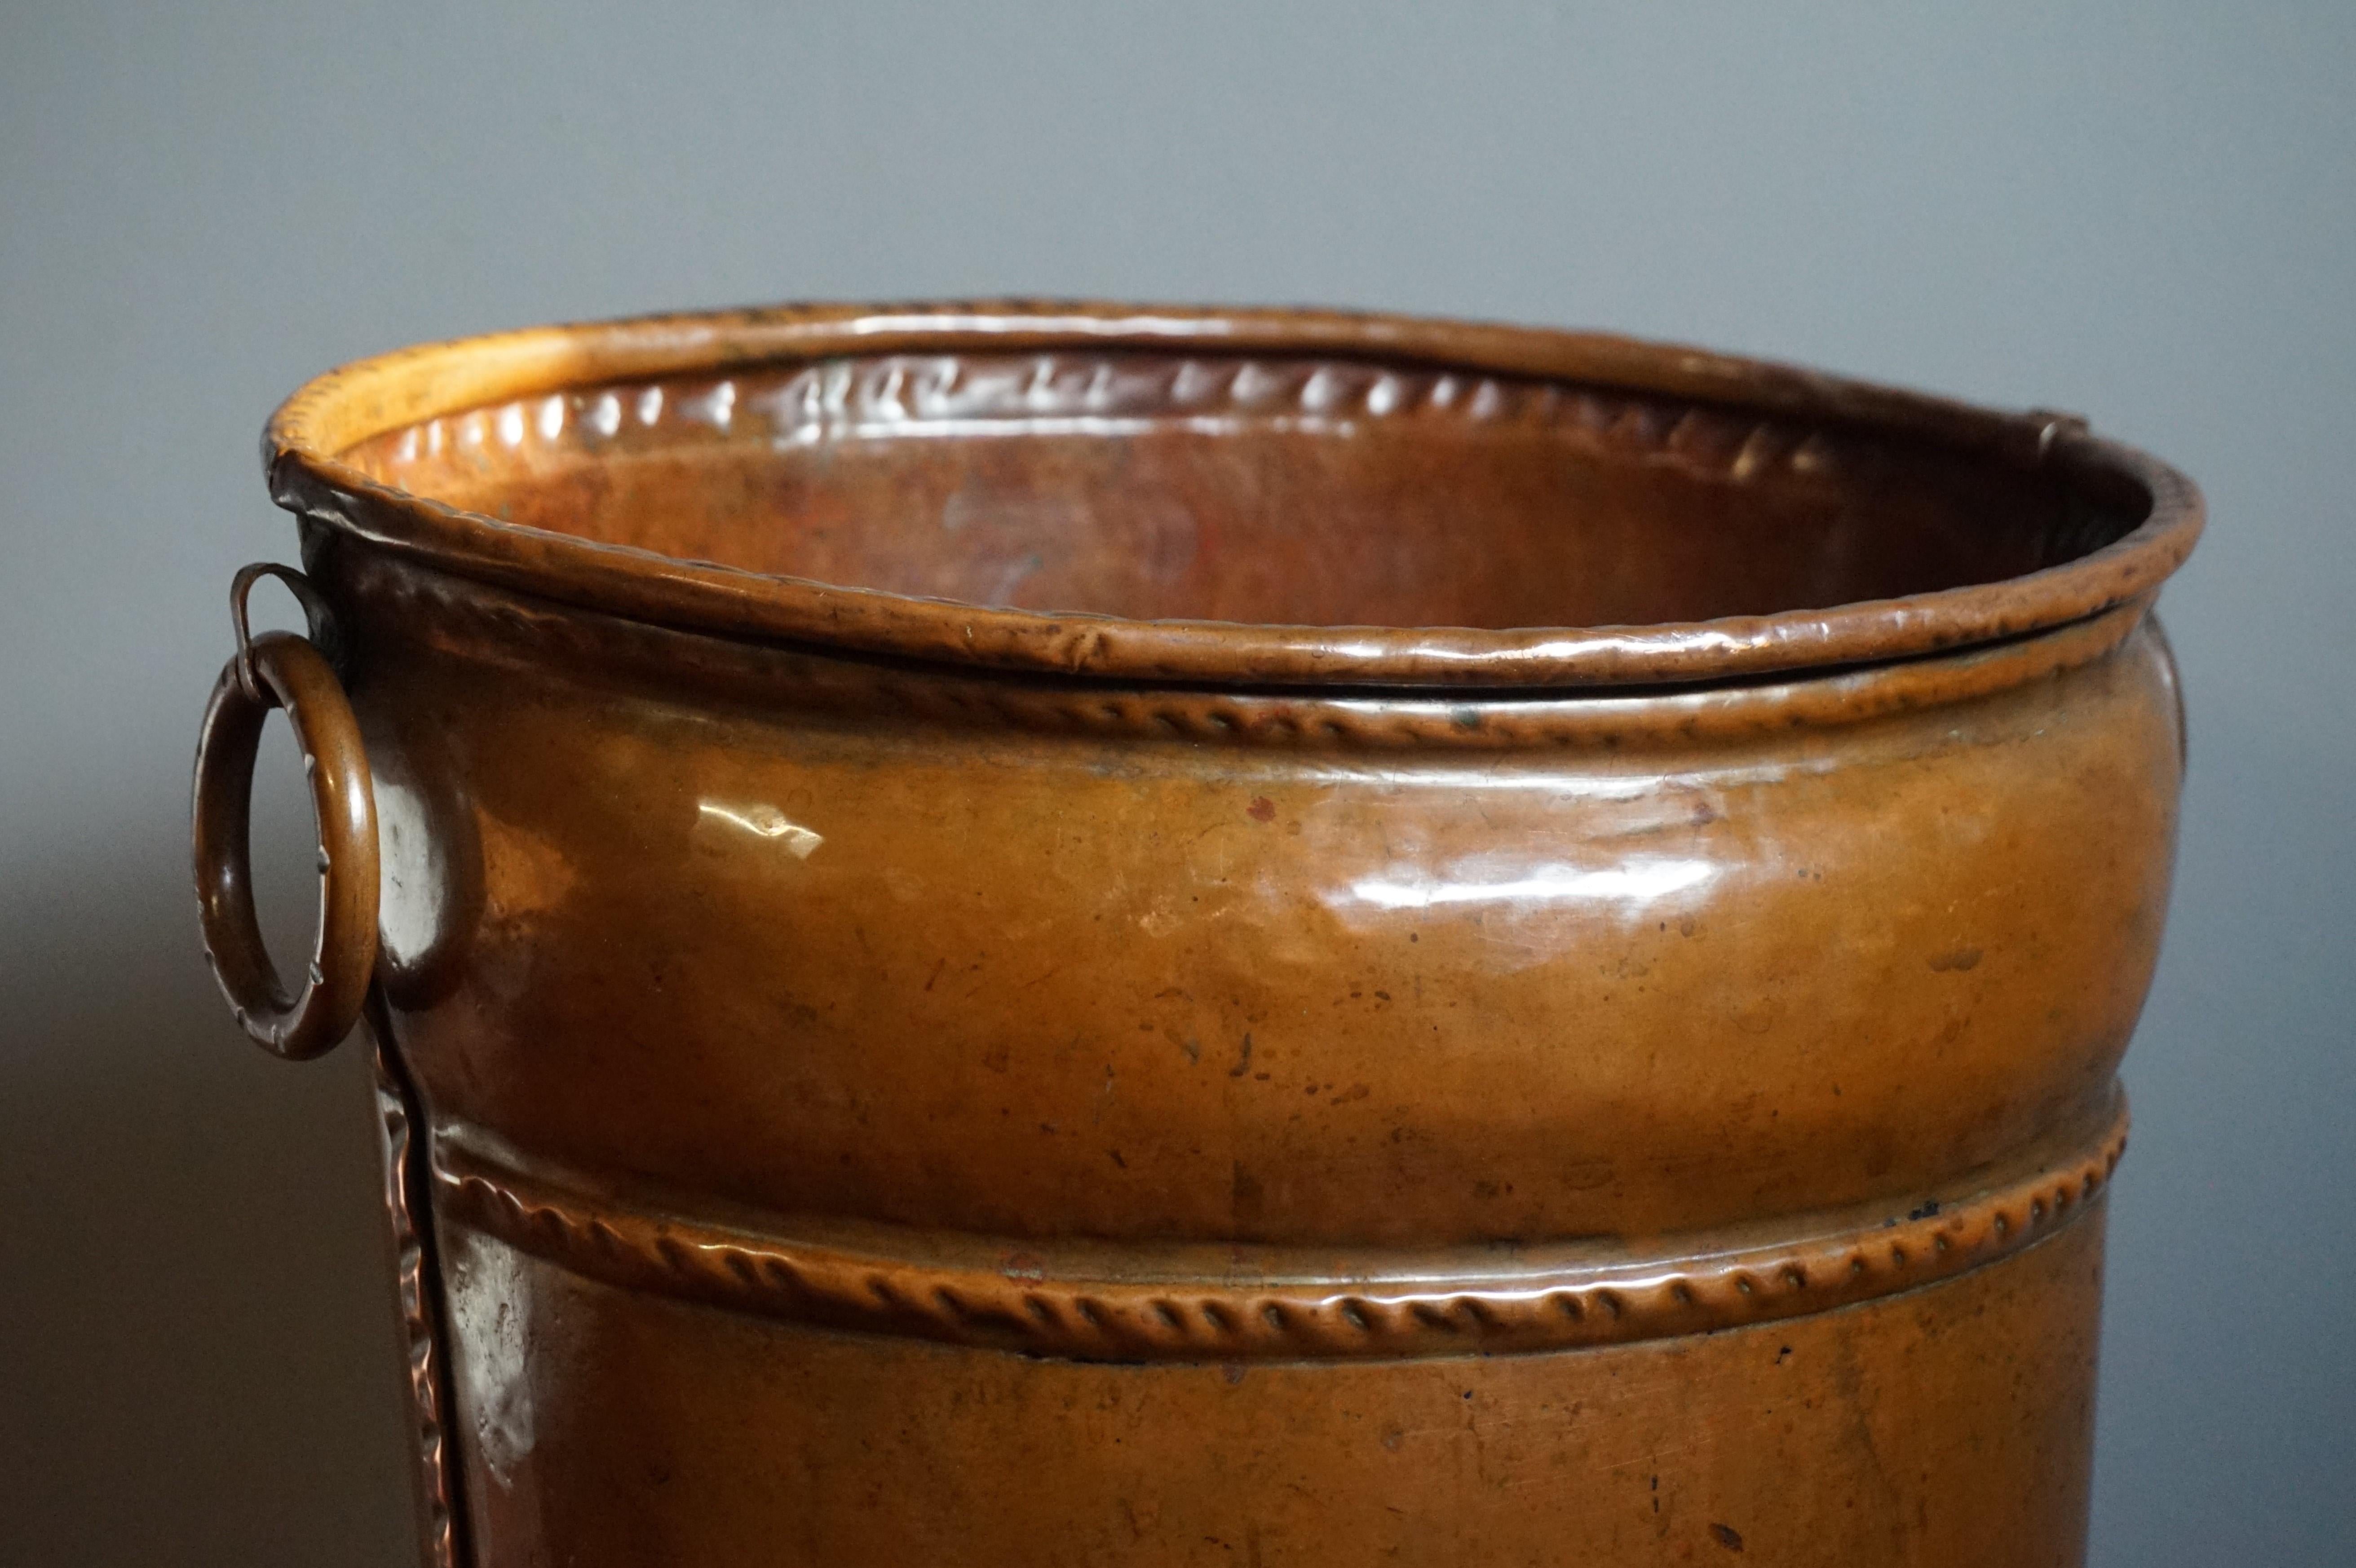 Hand-Crafted Late 1800s Handcrafted Copper Umbrella Stand Resembling Ancient Leather Bucket For Sale